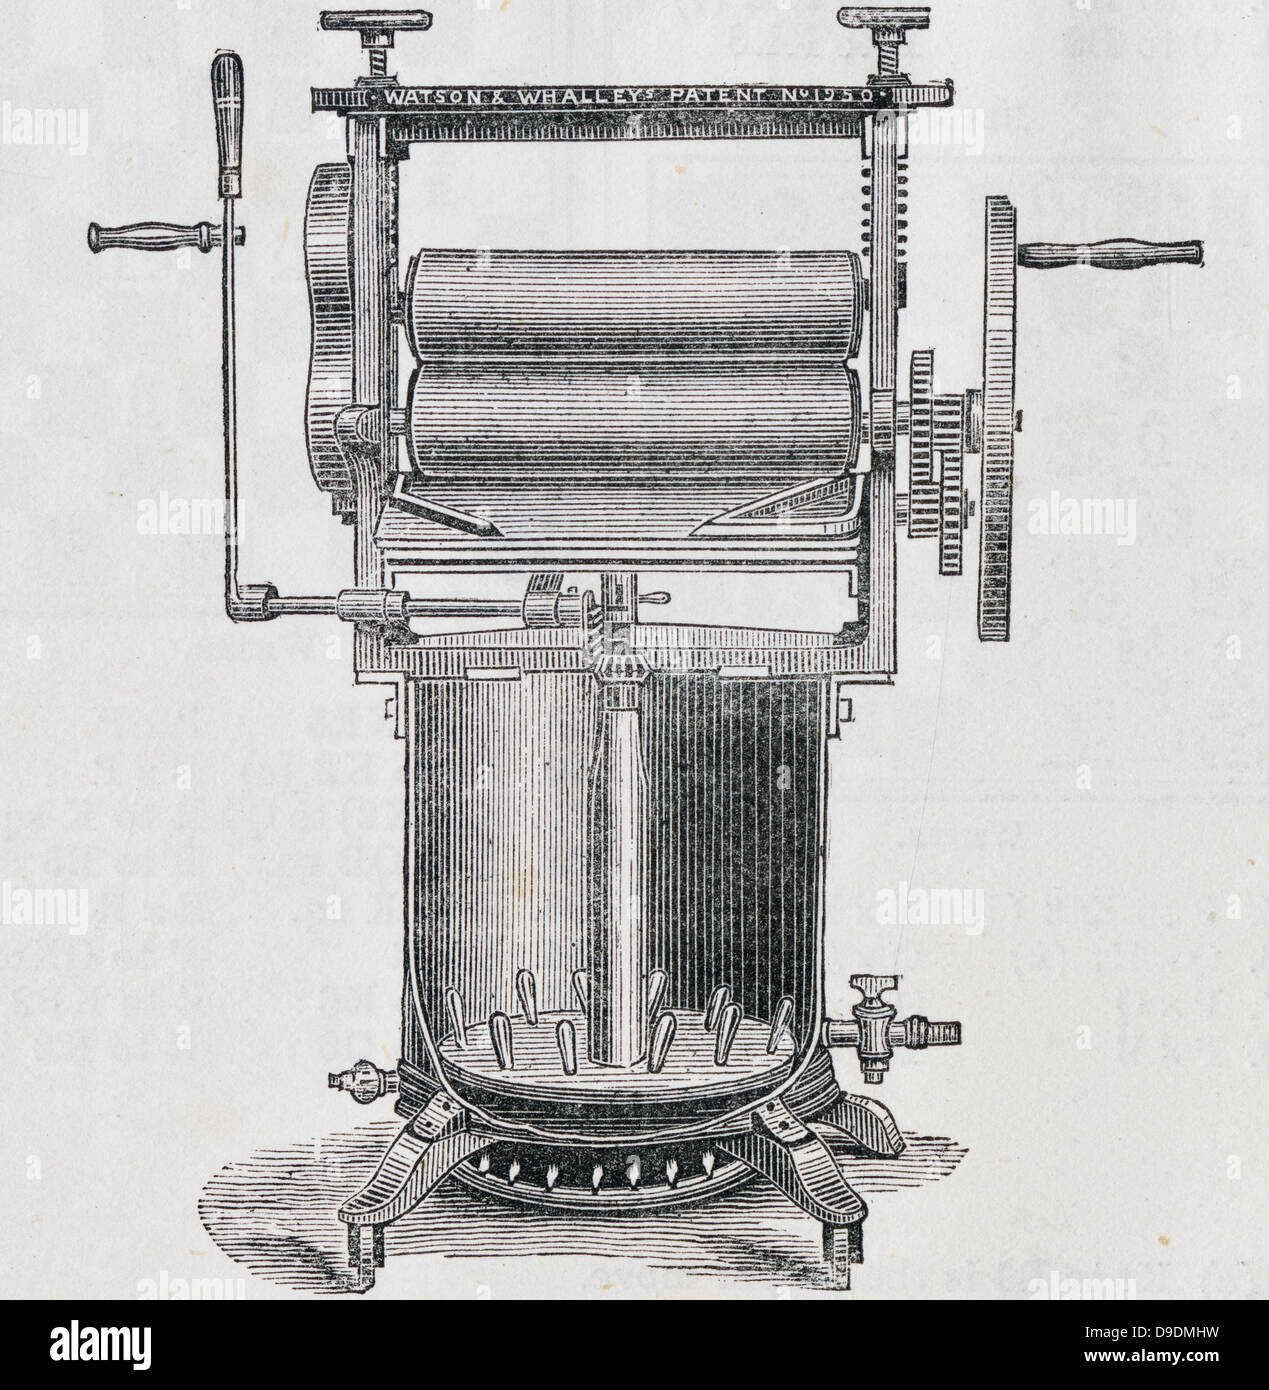 Washing machine by Watson and Whalley of Keighley, Yorkshire, England, patented 1884. Stock Photo